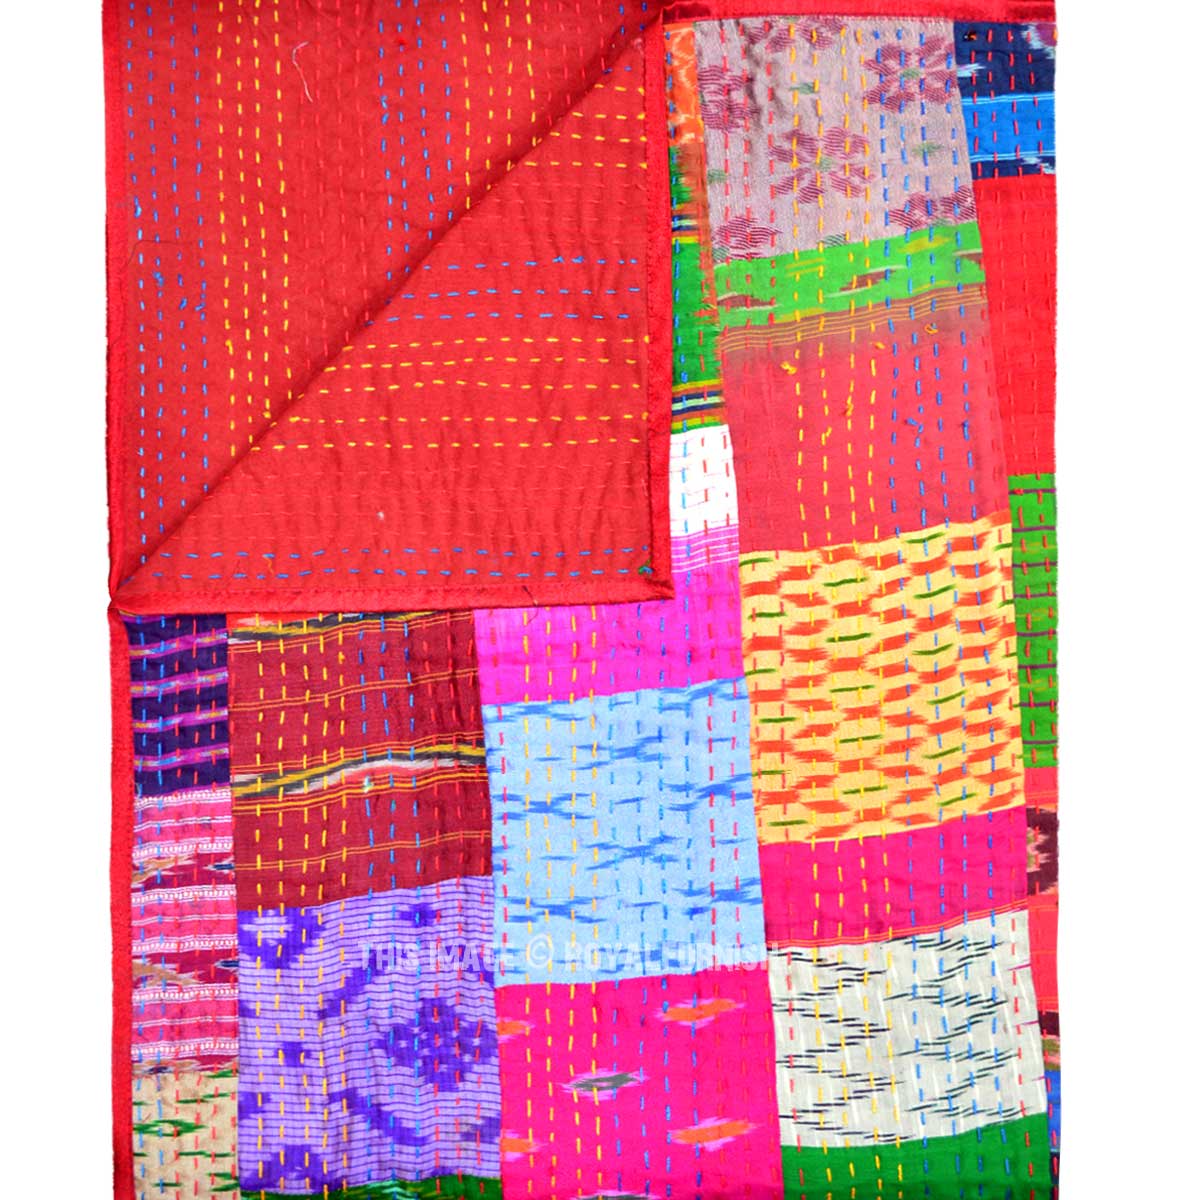 Indian King Silk Patola Patchwork Kantha Quilt Bedspreads Throw Blanket Multi Color Bohemian Bedspread Bohemian Bedding Handmade Kantha Quilt King Size 108 X 108 Inch Quilt Patch Quilt Bed Cover